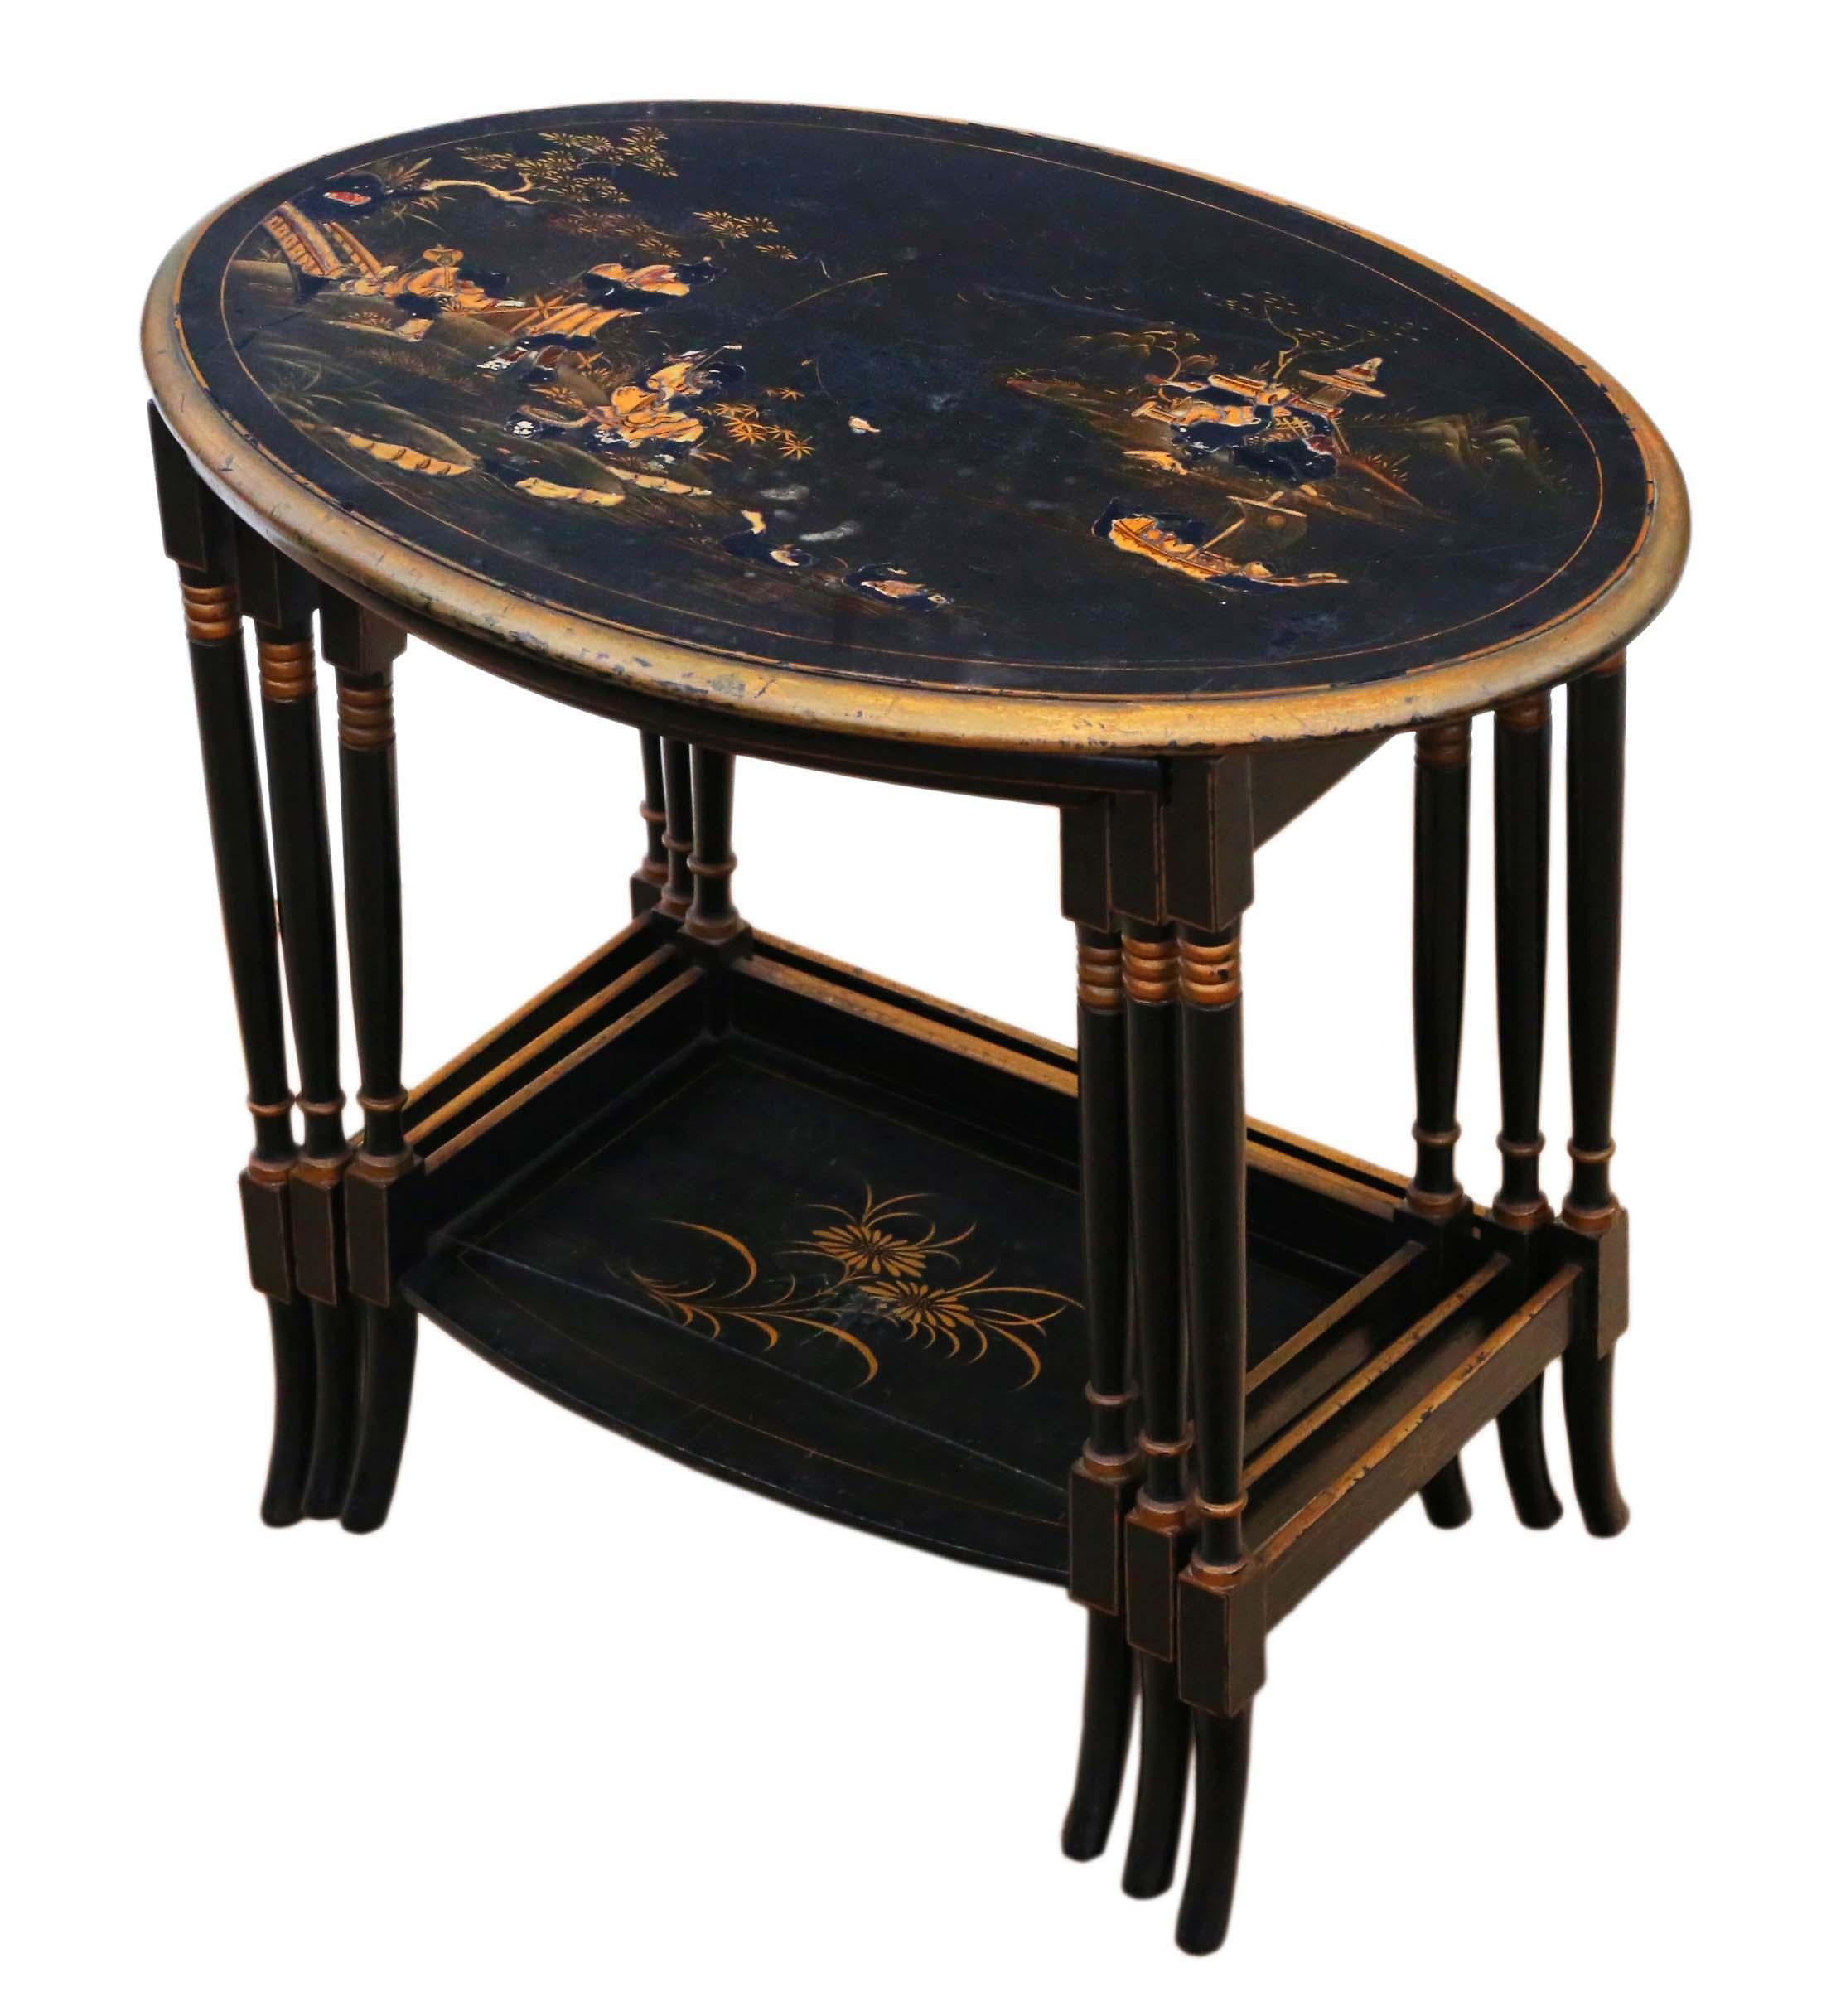 Antique quality Victorian oriental chinoiserie nest of decorated black lacquer tables. Date from circa 1895.
 
Very attractive, with lovely proportions and styling. No woodworm.
 
No loose joints or woodworm.
Good age color and